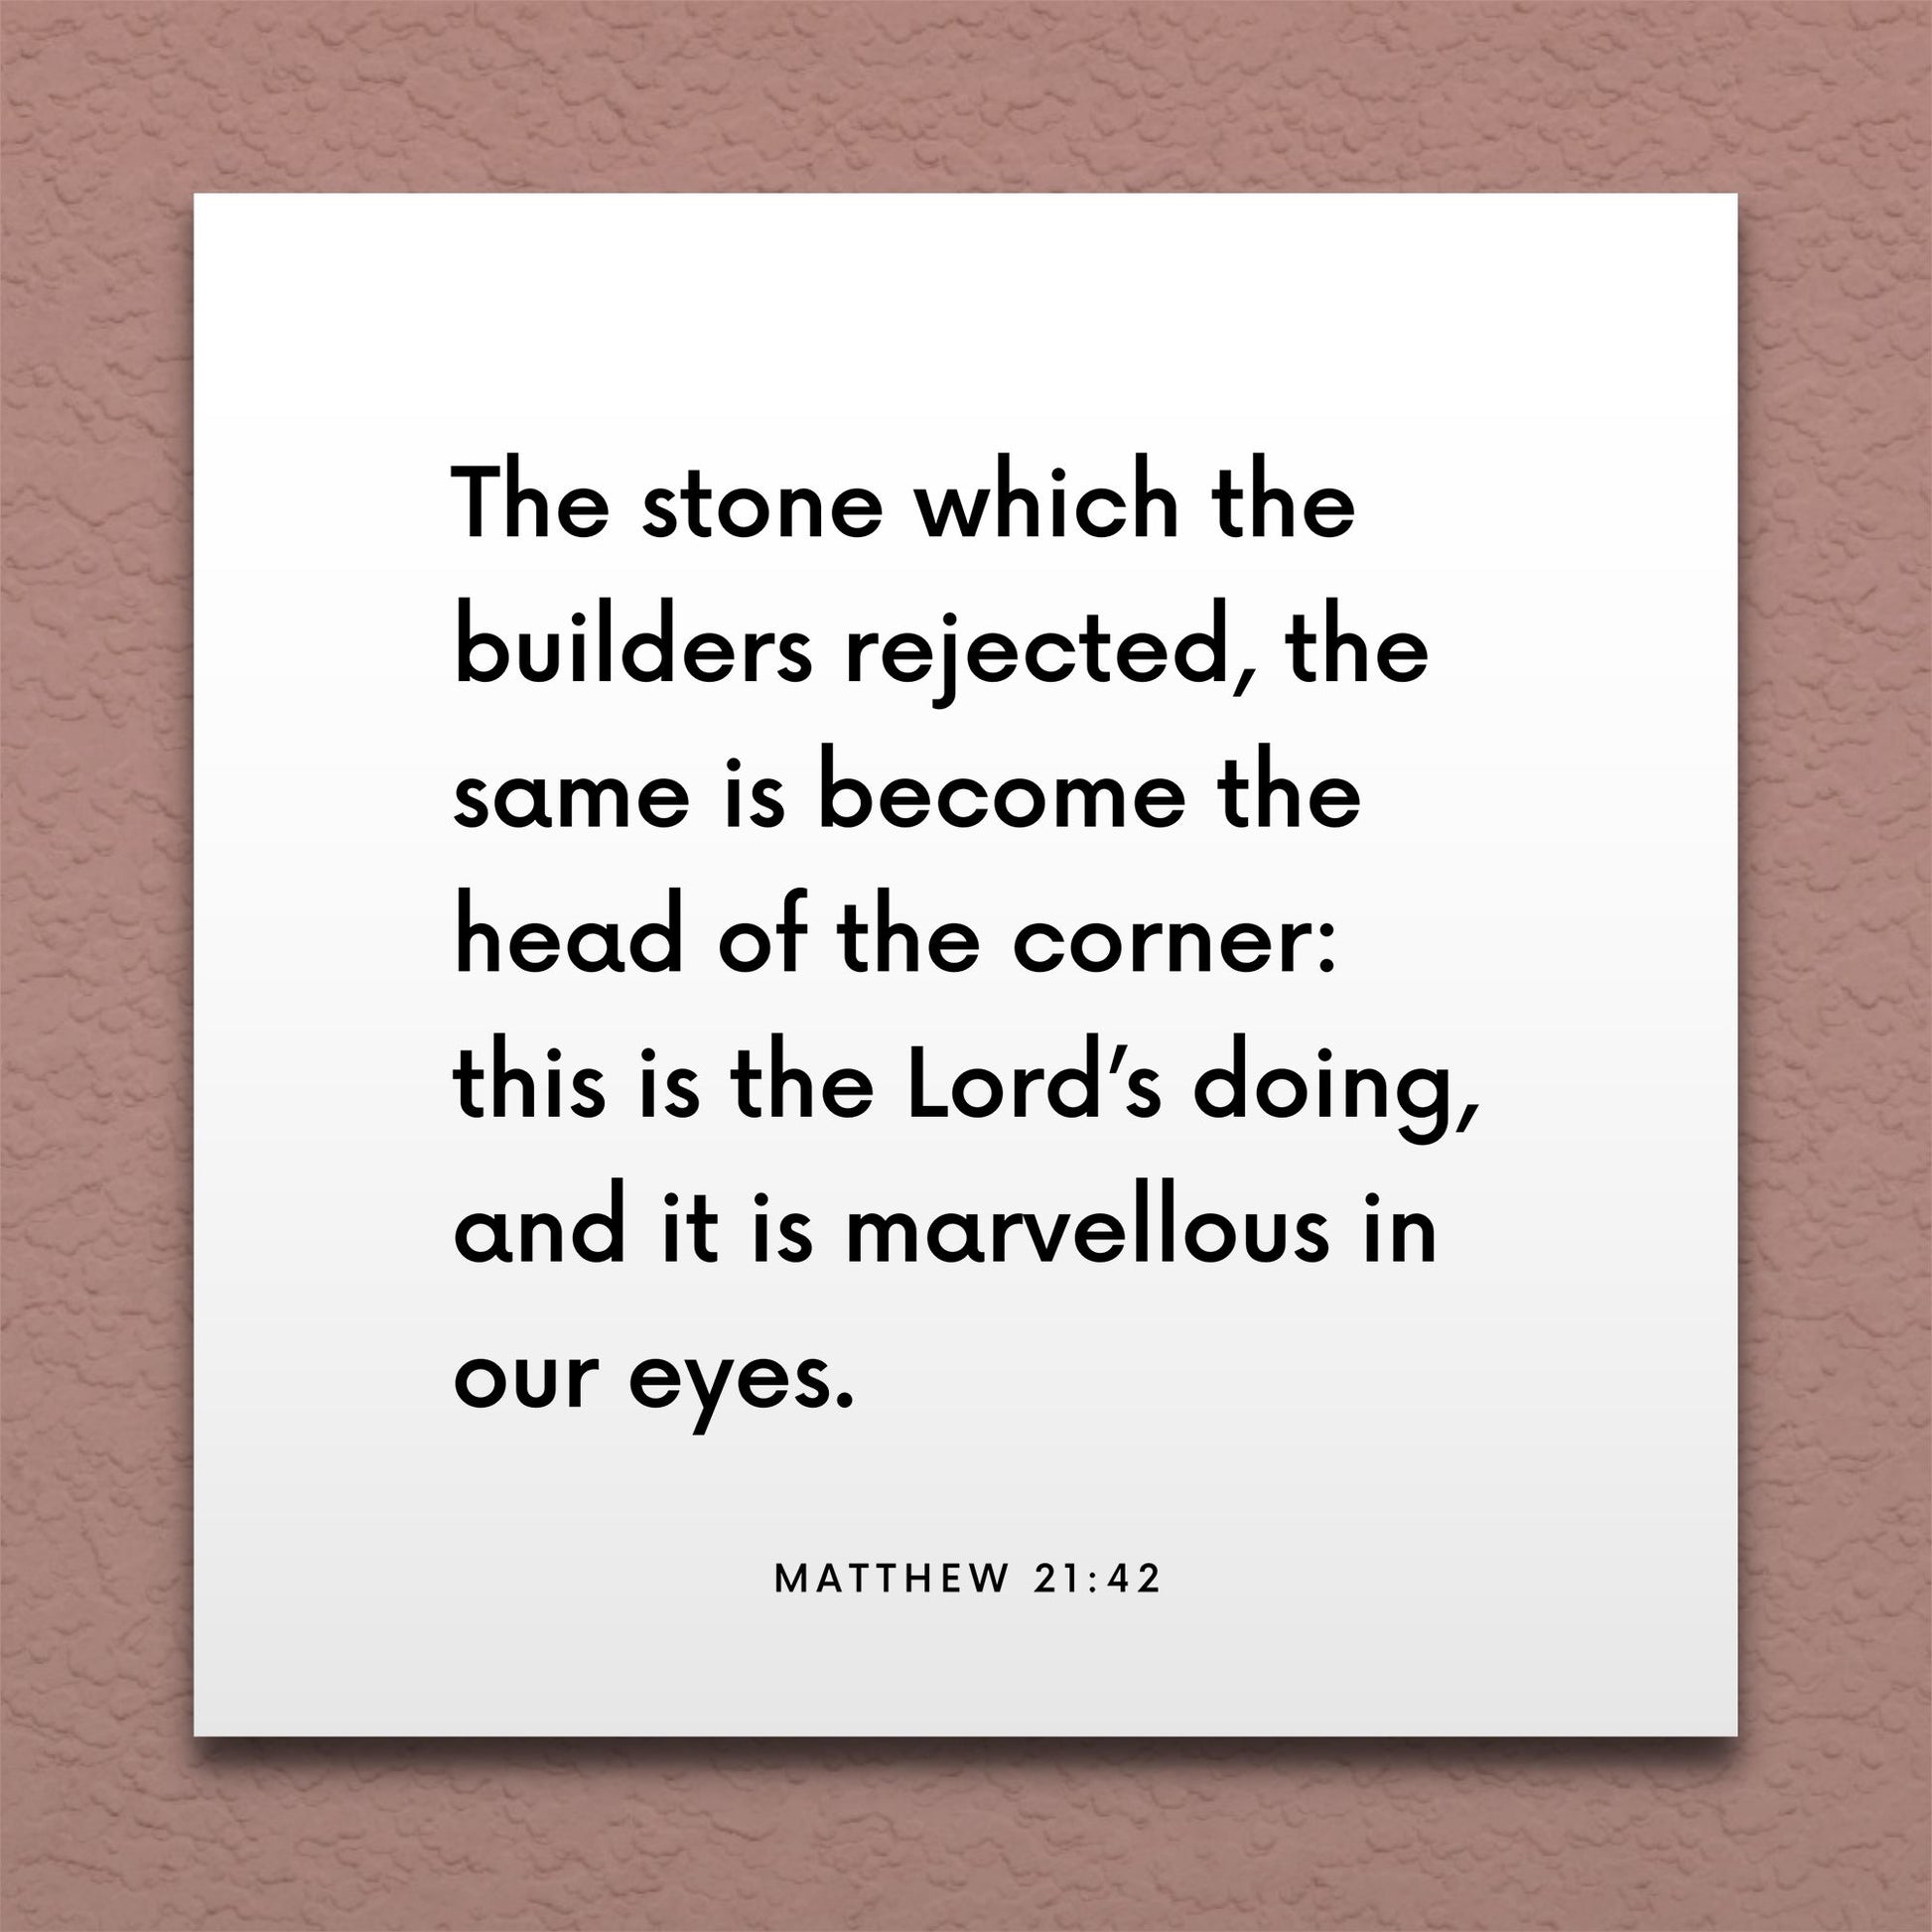 Wall-mounted scripture tile for Matthew 21:42 - "The stone which the builders rejected"